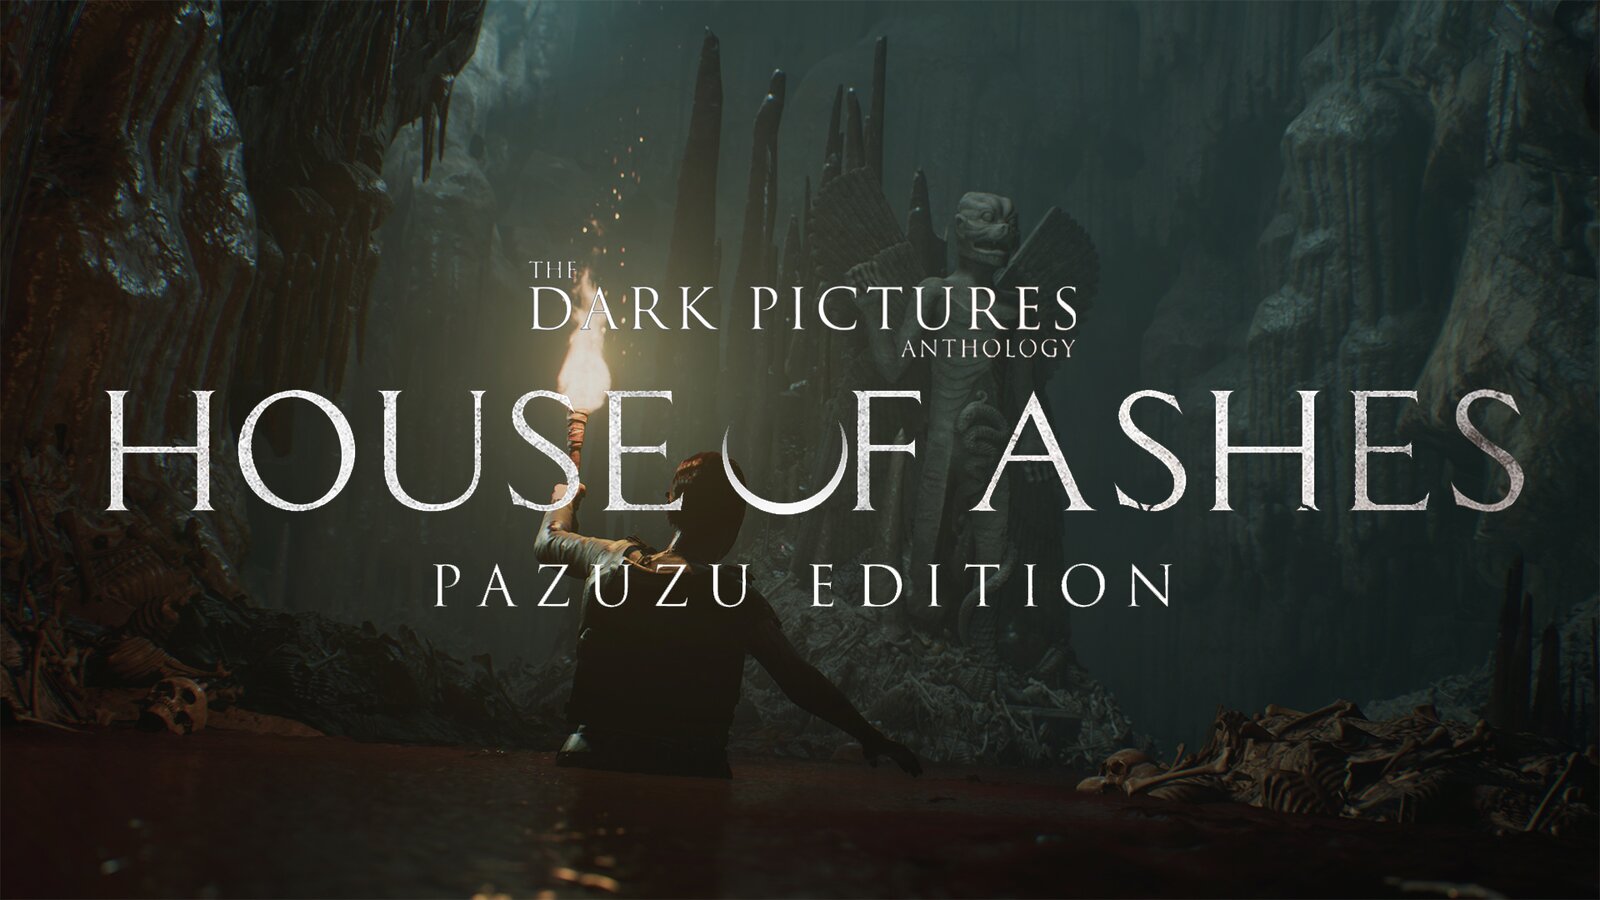 The Dark Pictures: House of Ashes - Pazuzu Edition